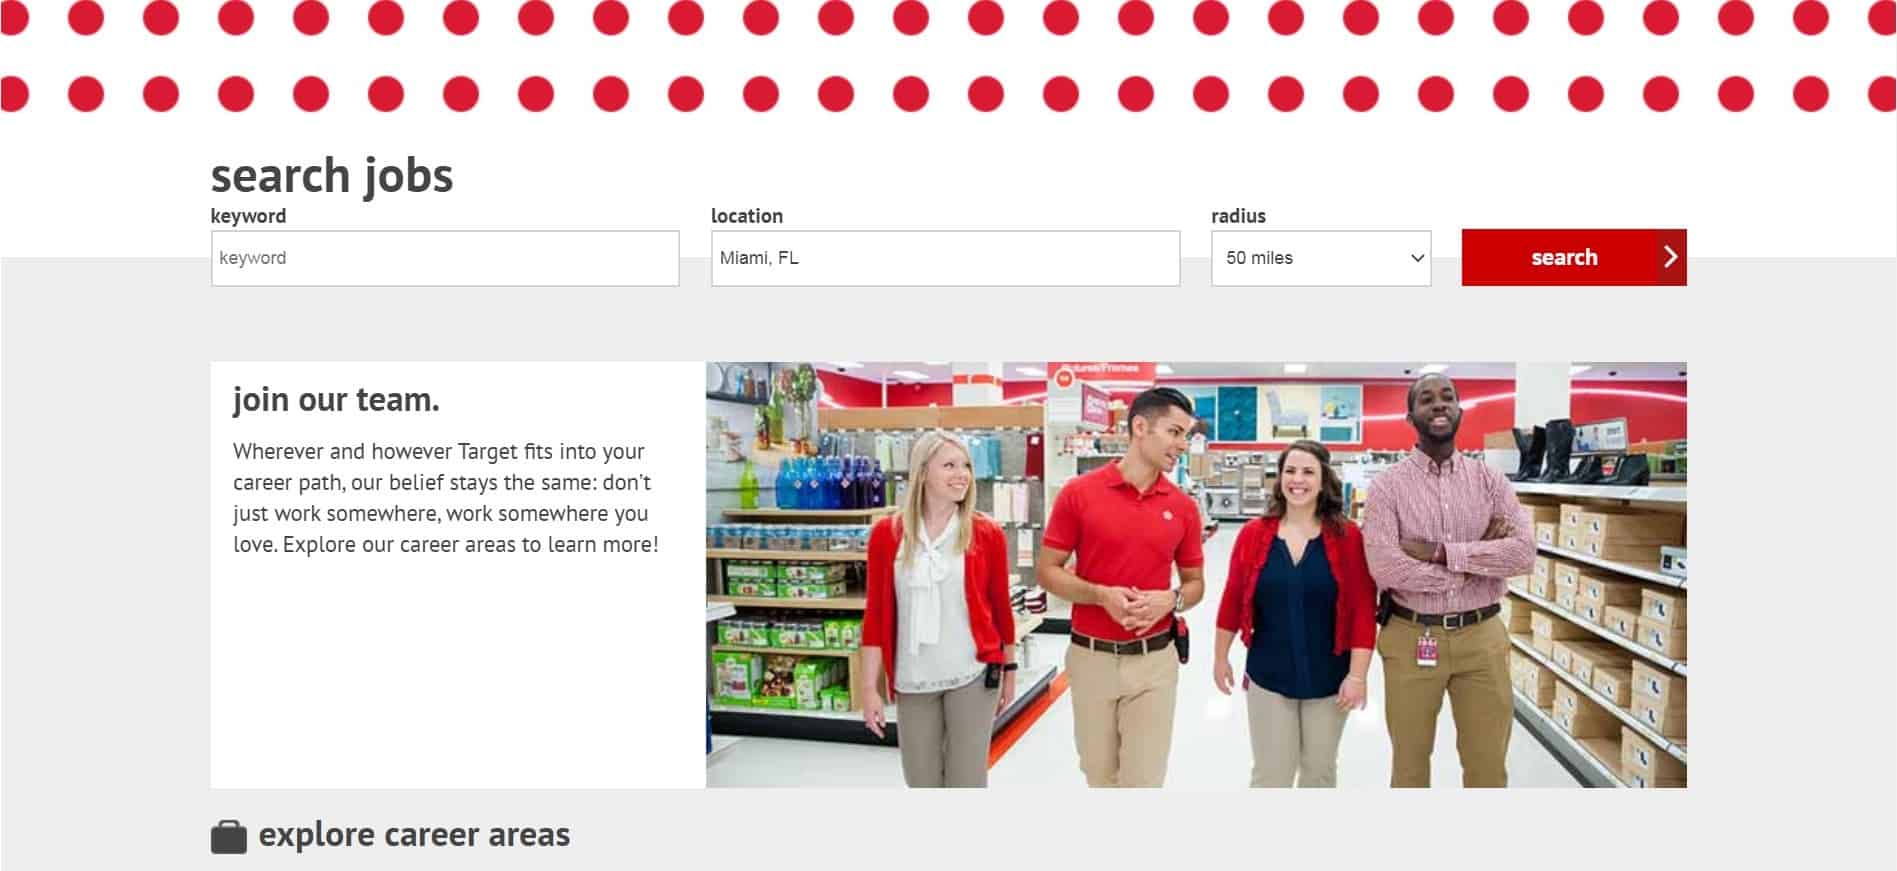 Use the "search jobs" page to find seasonal Target jobs in your area.